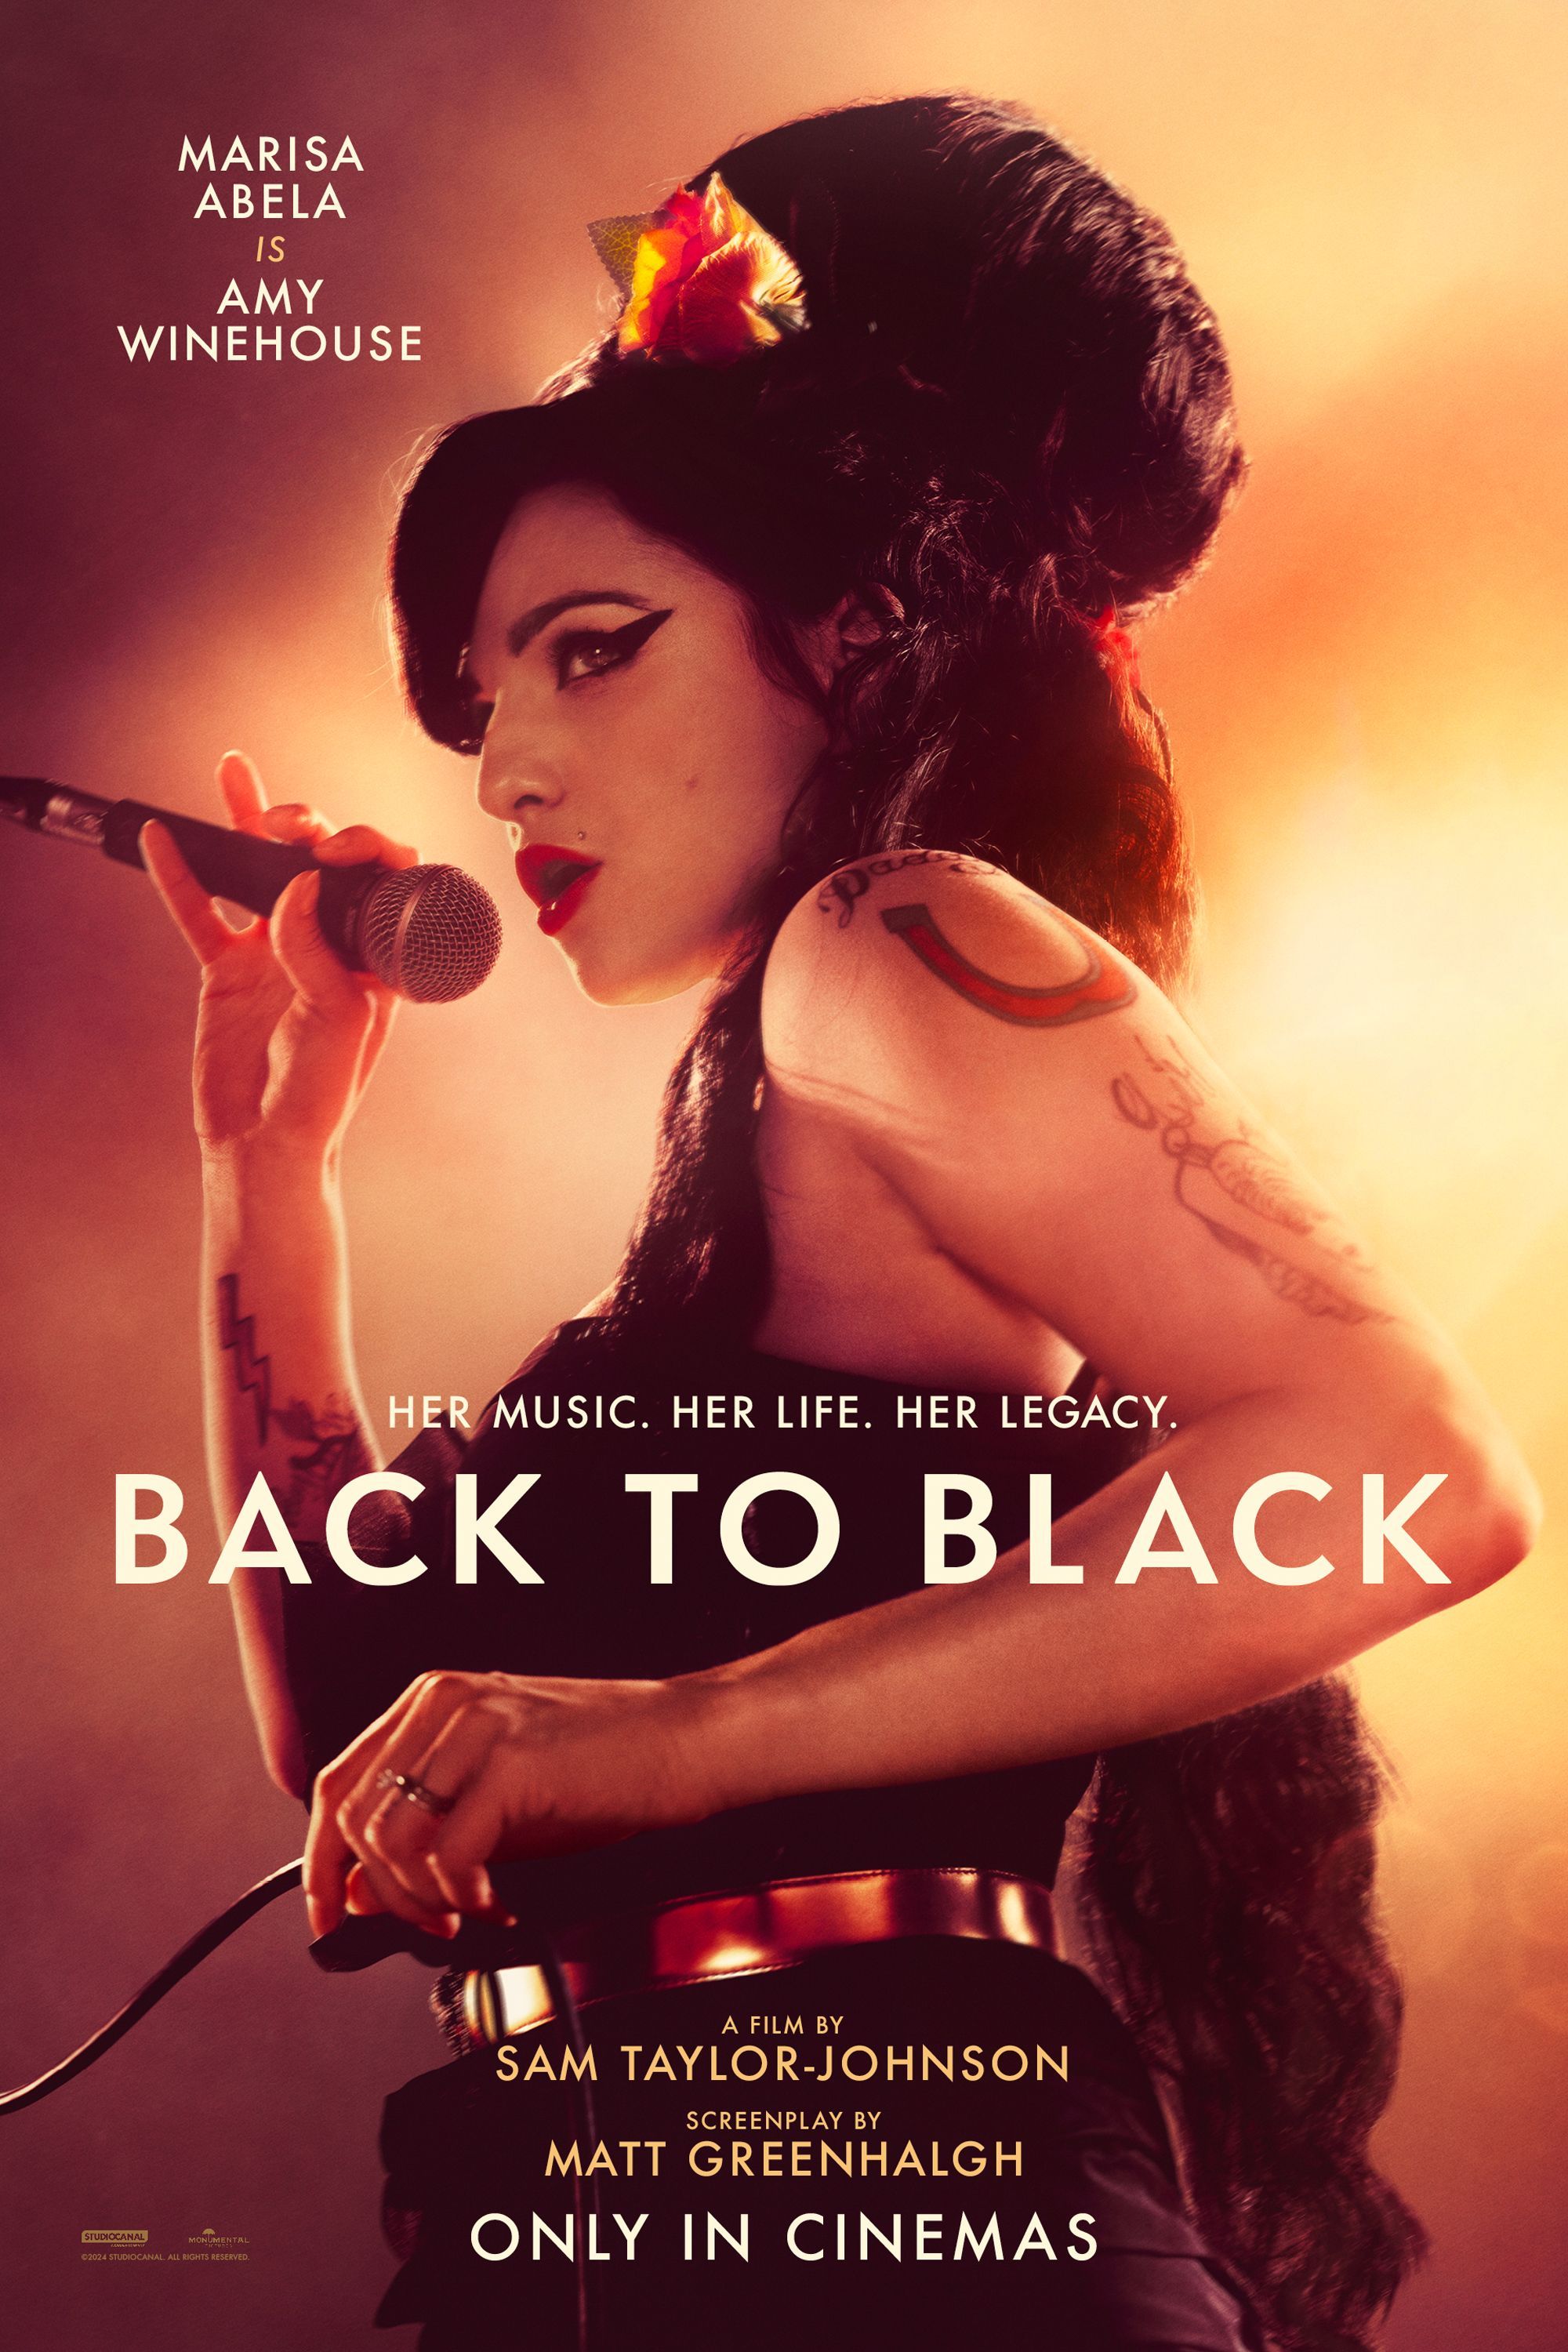 Back to Black Movie Poster showing Marisa Abela as Amy Winehouse Holding a Microphone